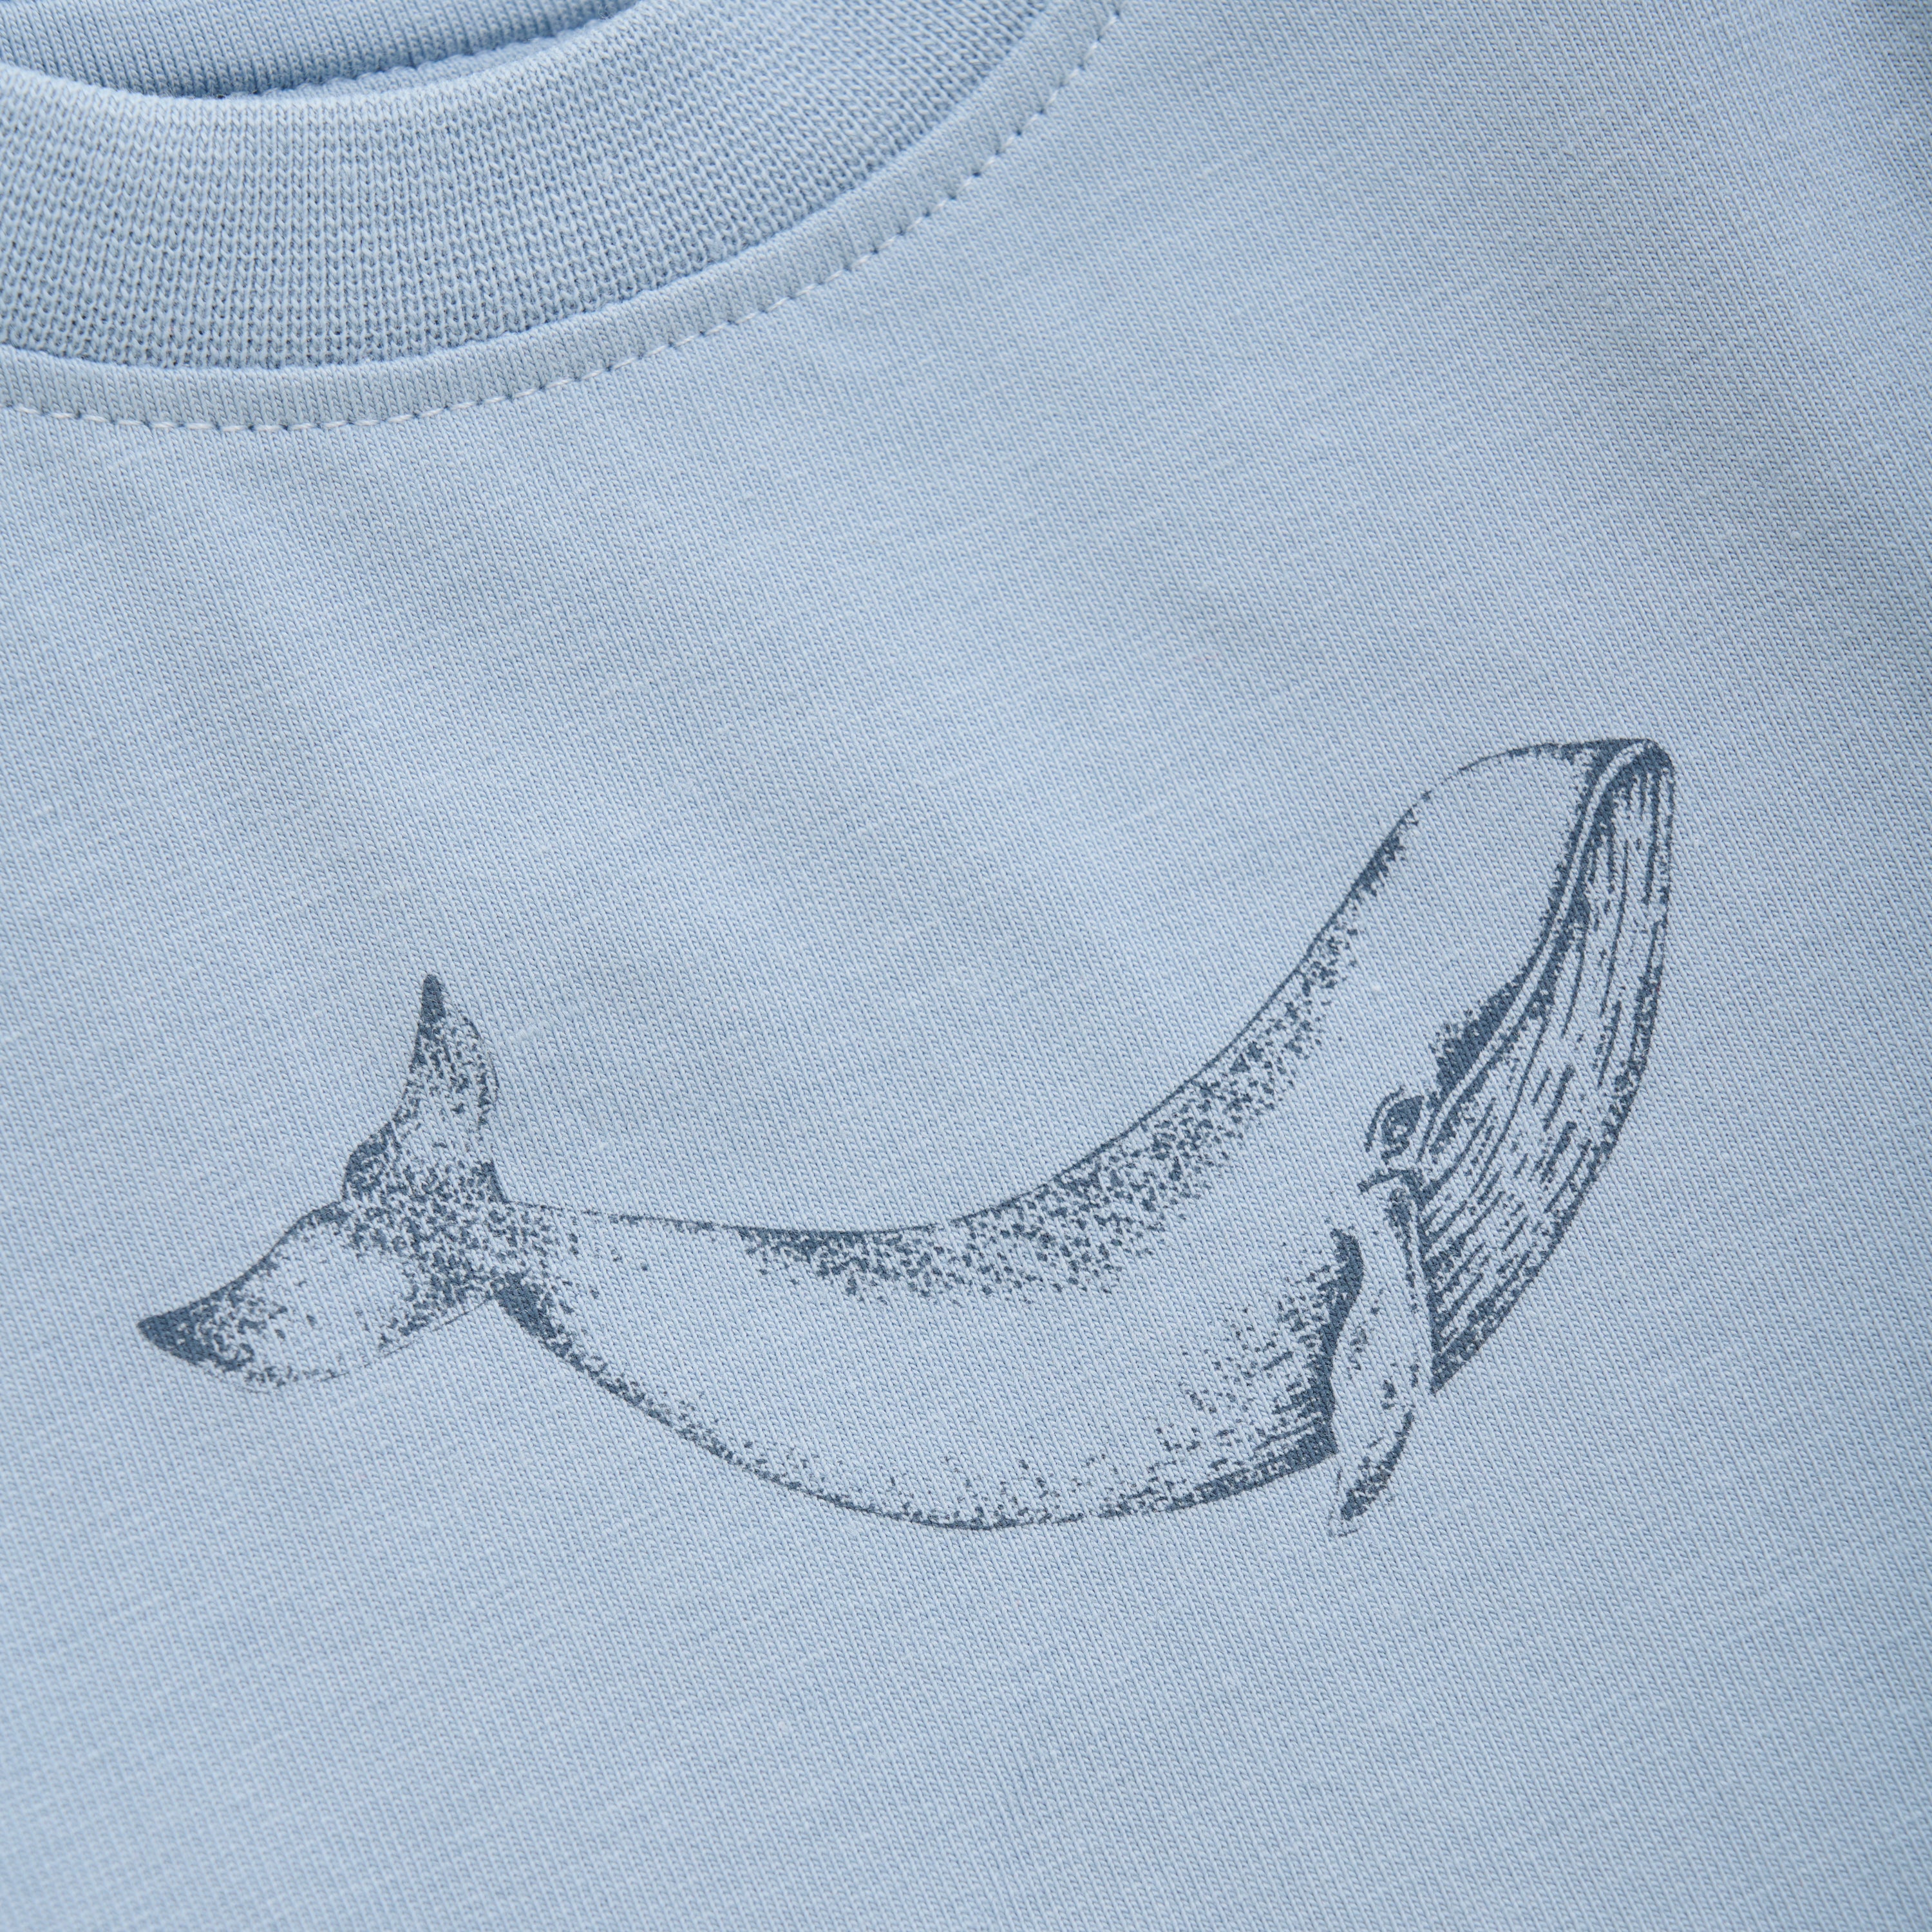 Whale Print T-Shirt and Pants Set - Dusty Blue and Cement